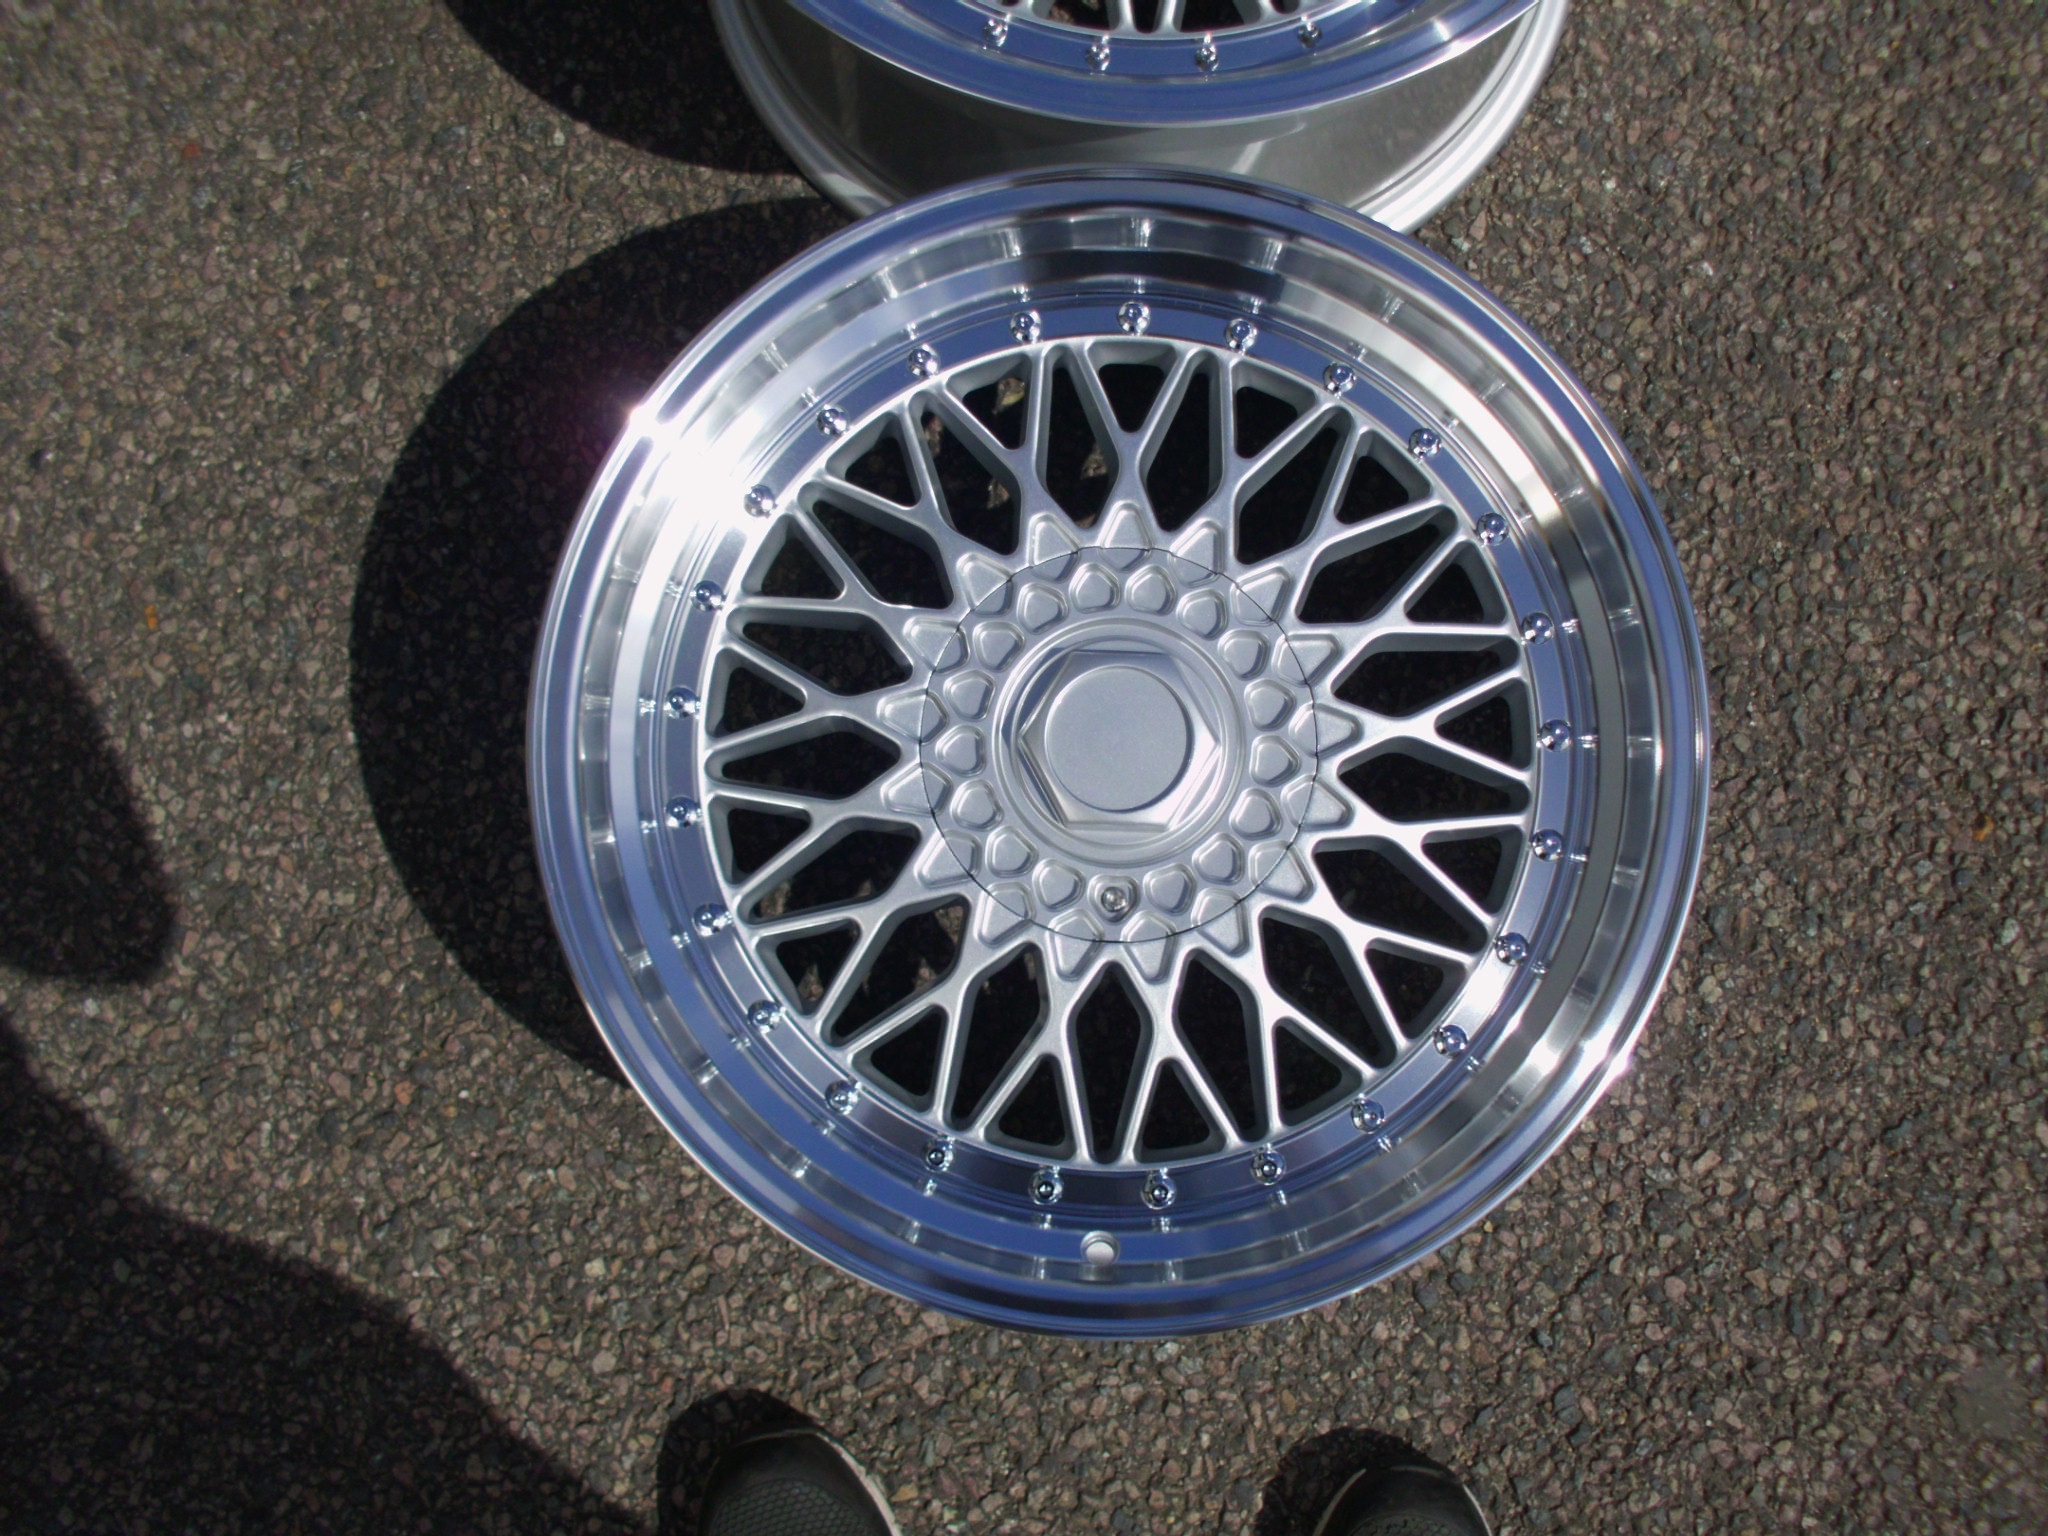 NEW 18" RS STYLE ALLOY WHEELS IN SILVER/POLISHED,WITH CHROME RIVETS, DEEP DISH 9.5" REAR!! et35/40